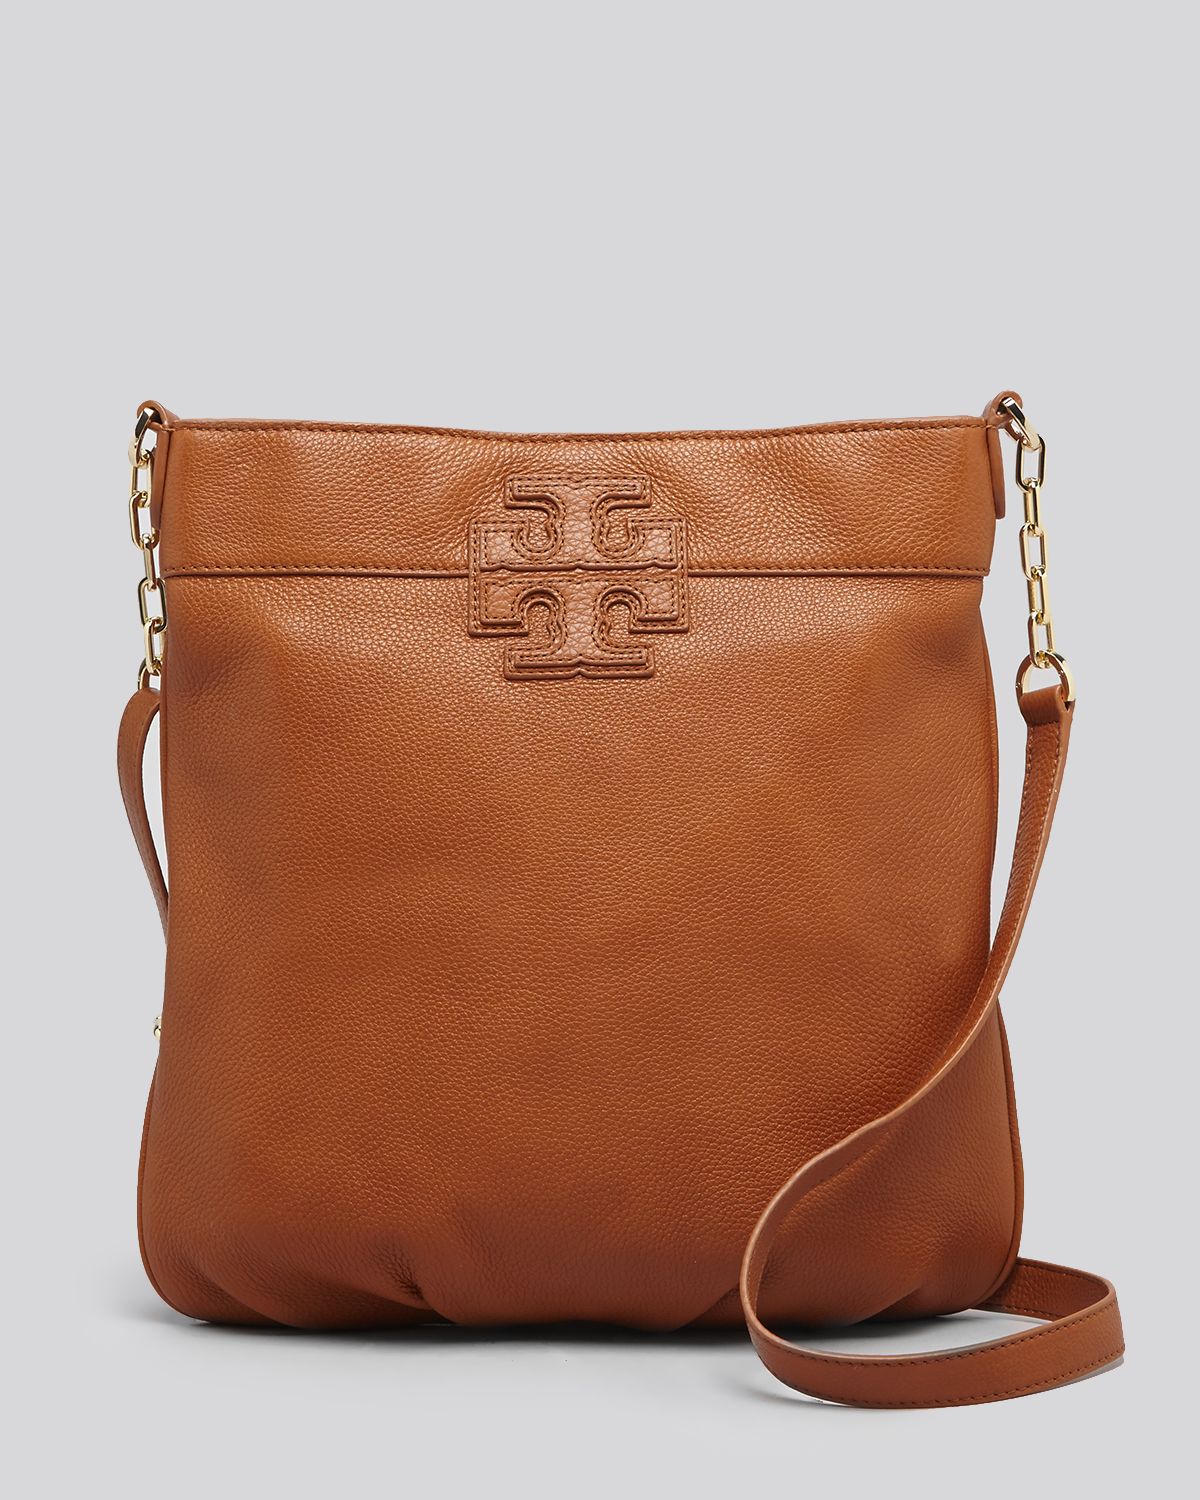 Tory Burch Crossbody Stacked T Book Bag in Brown | Lyst